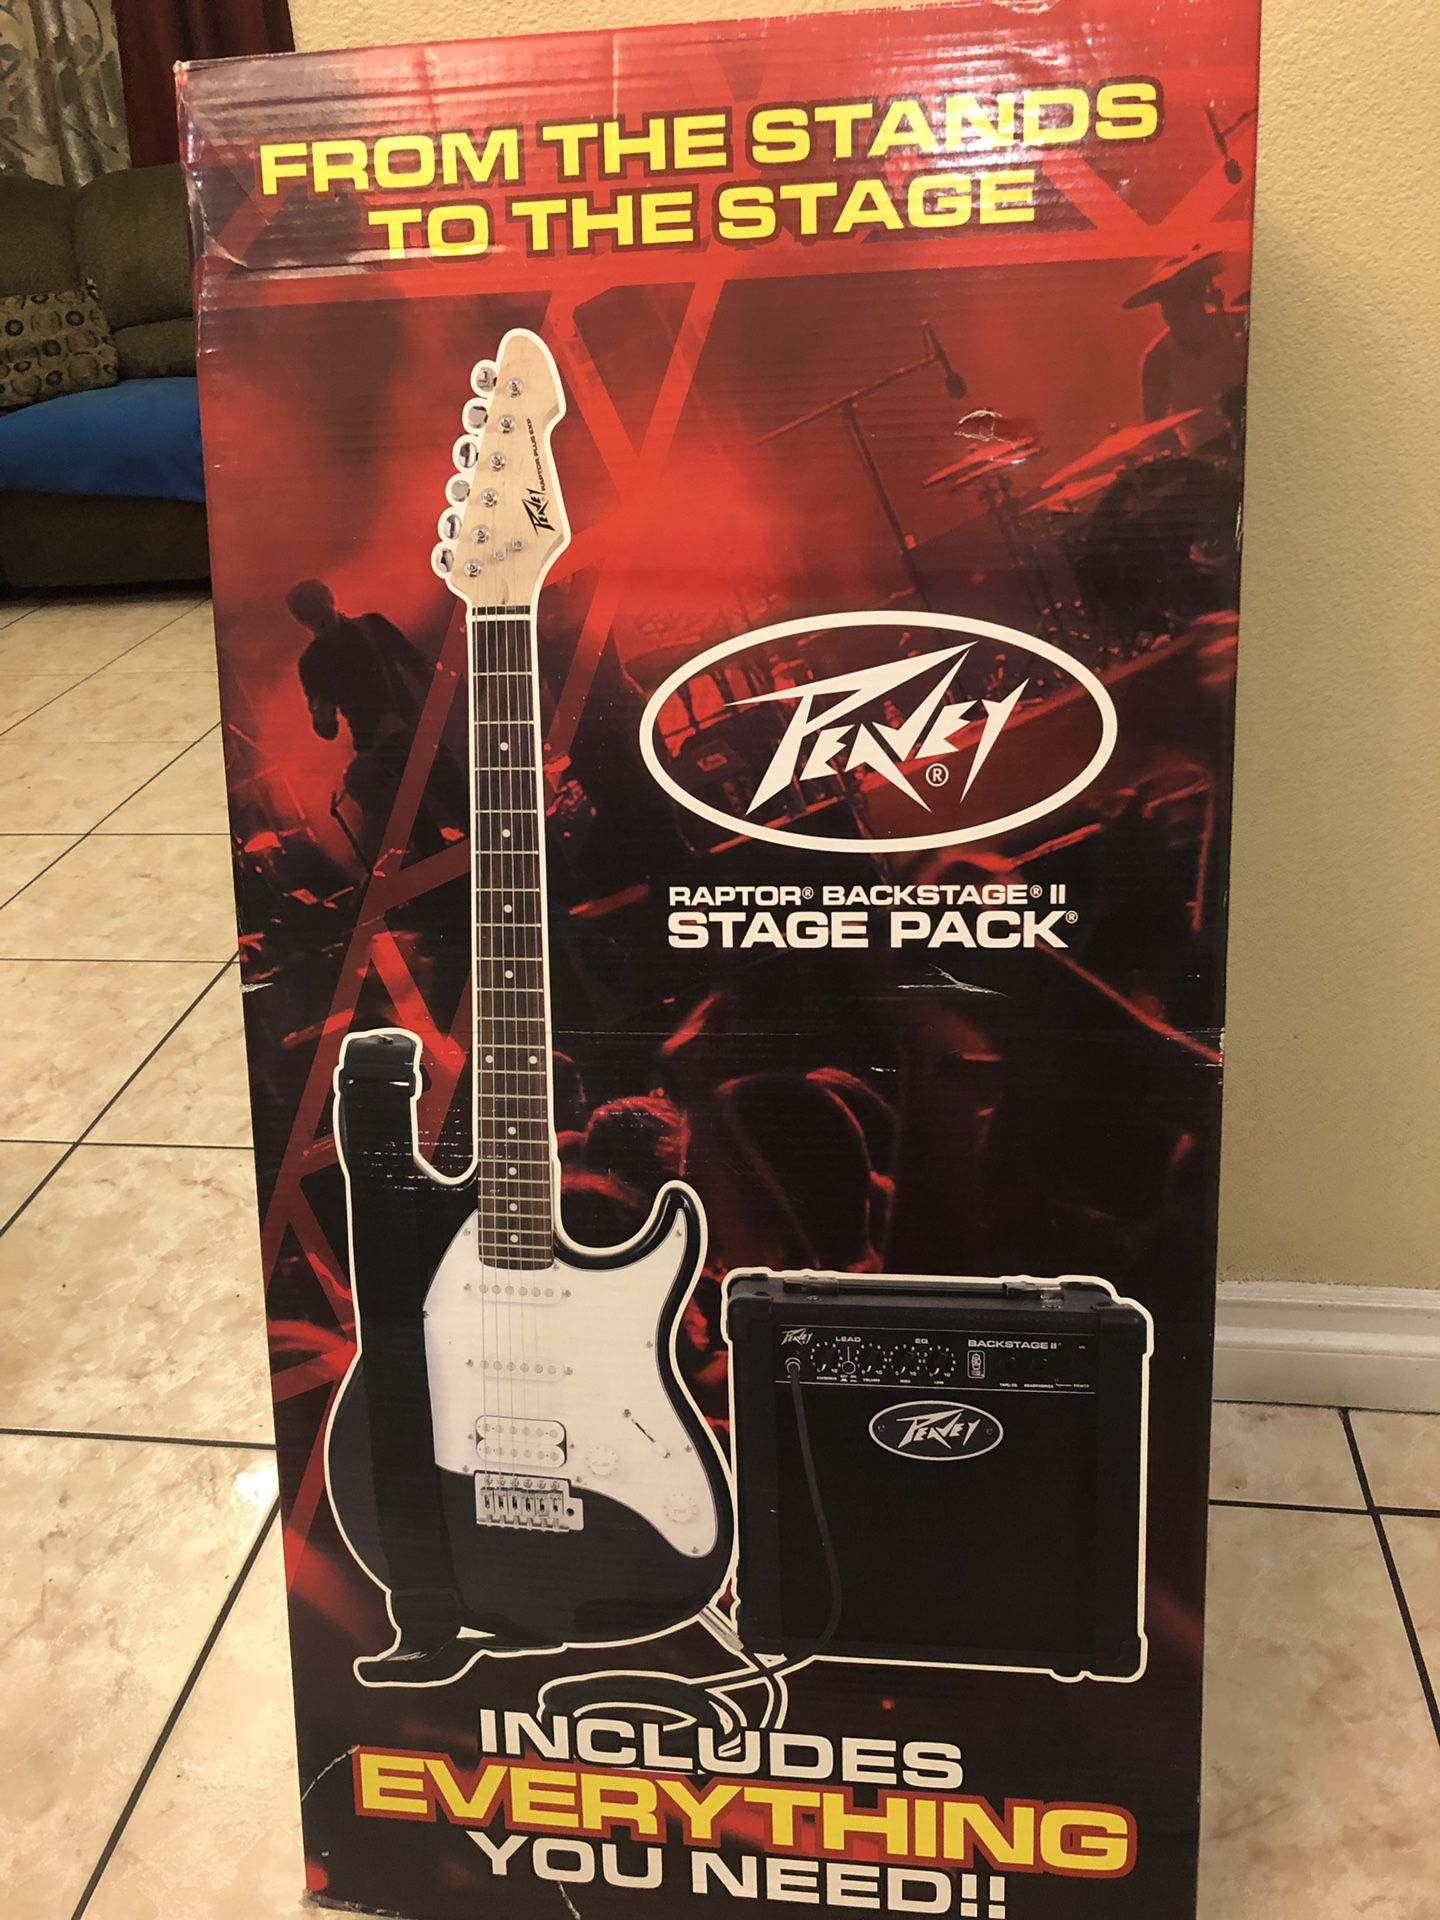 Peavey electric guitar package come with amplifier soft case strap cable tuner strings picks and dvd